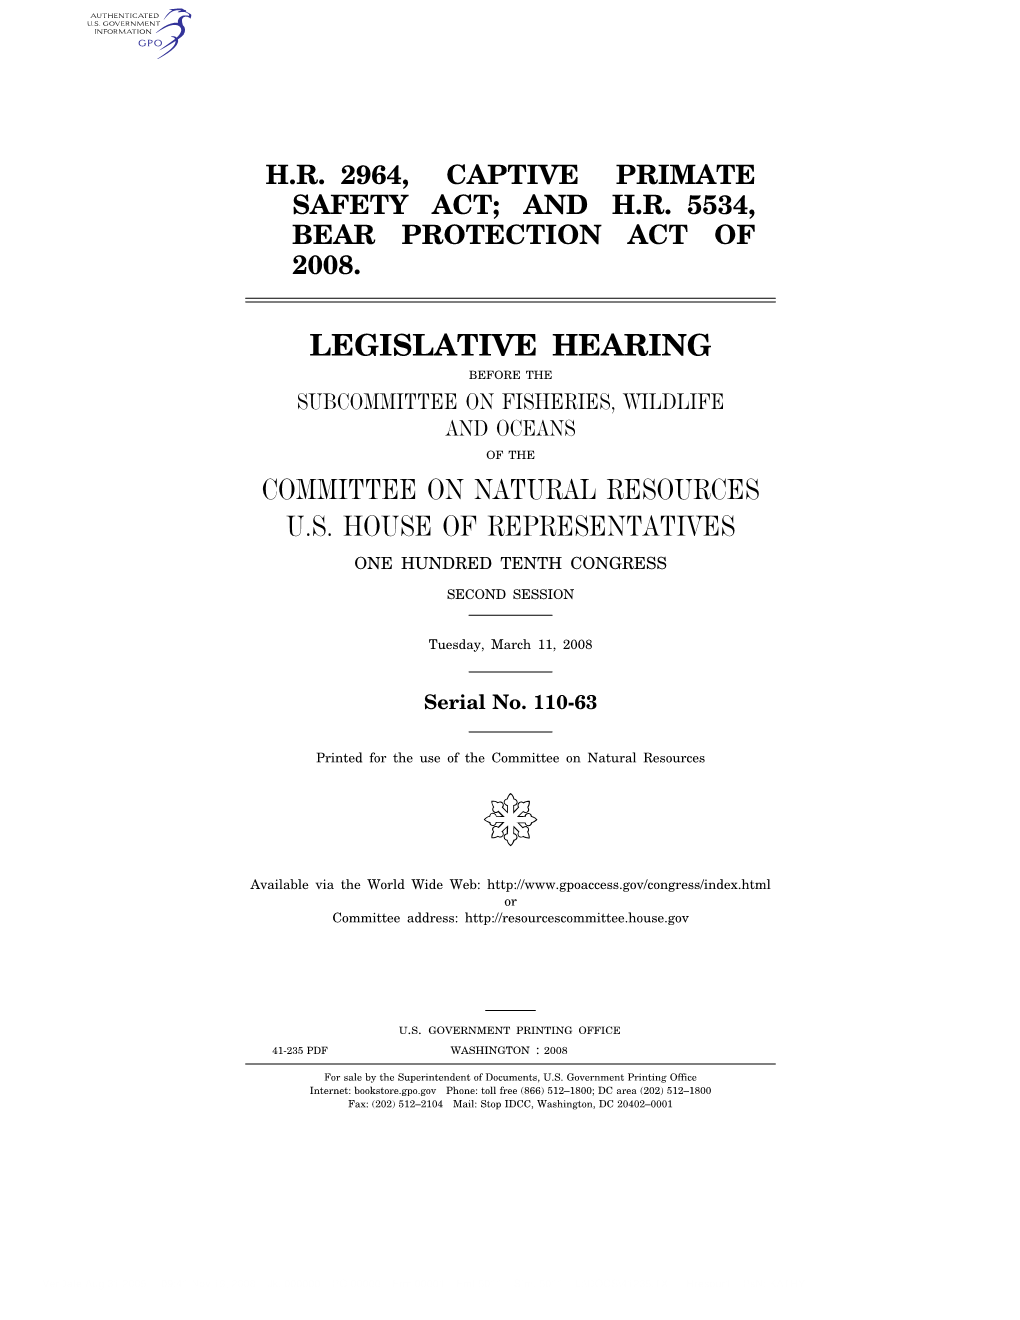 Legislative Hearing Committee on Natural Resources